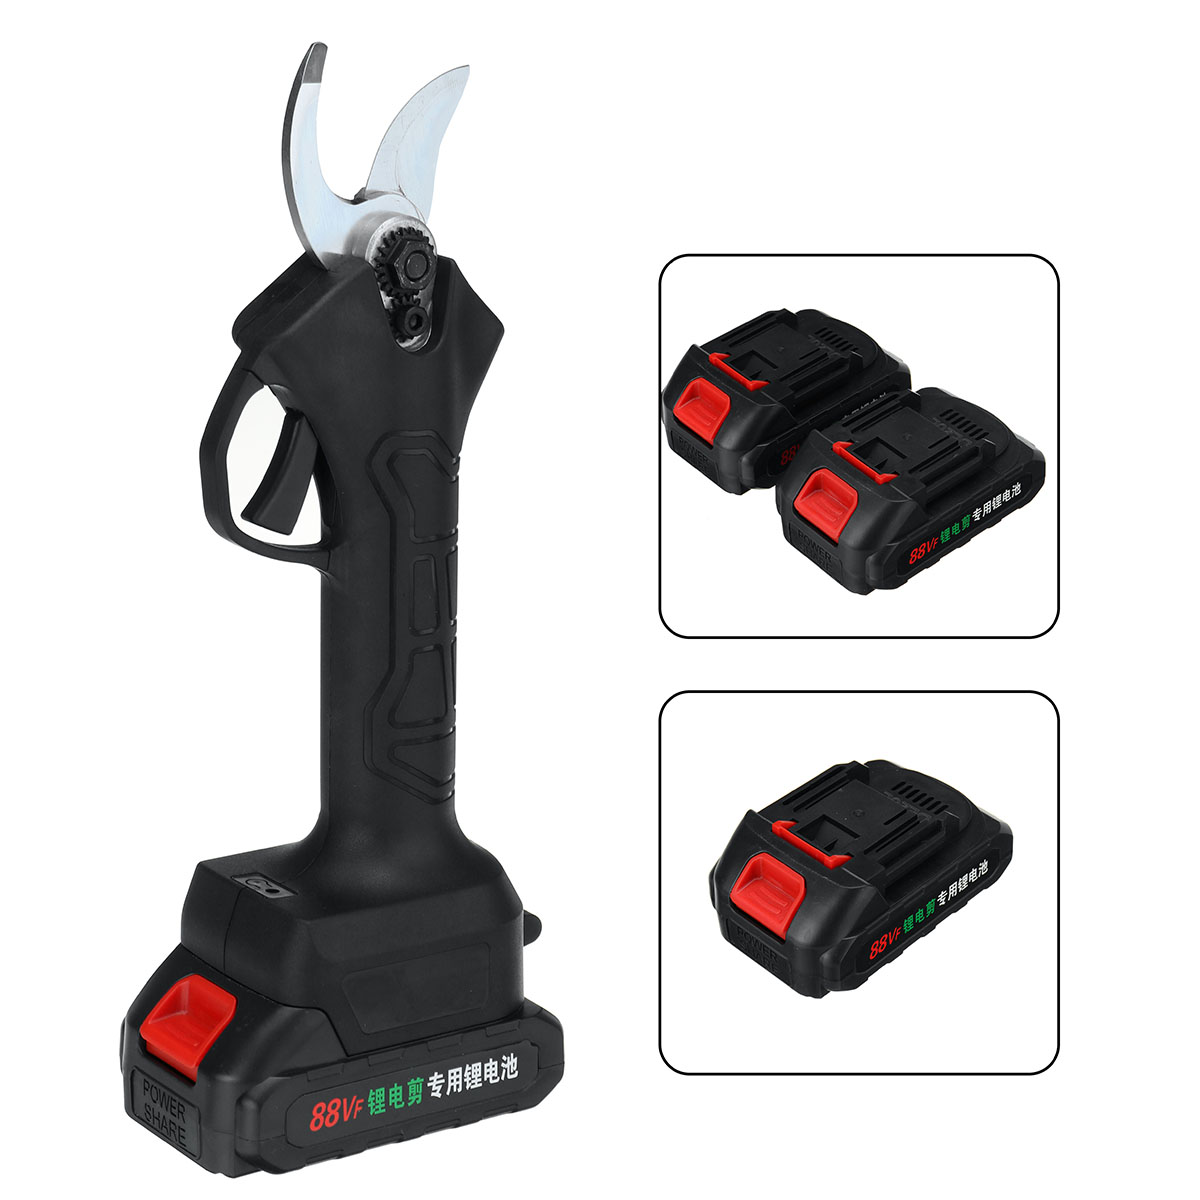 21V-Cordless-Pruning-Shears-Electric-Scissors-Rechargeable-Wood-Cutter-W-12pcs-Battery-1802318-10